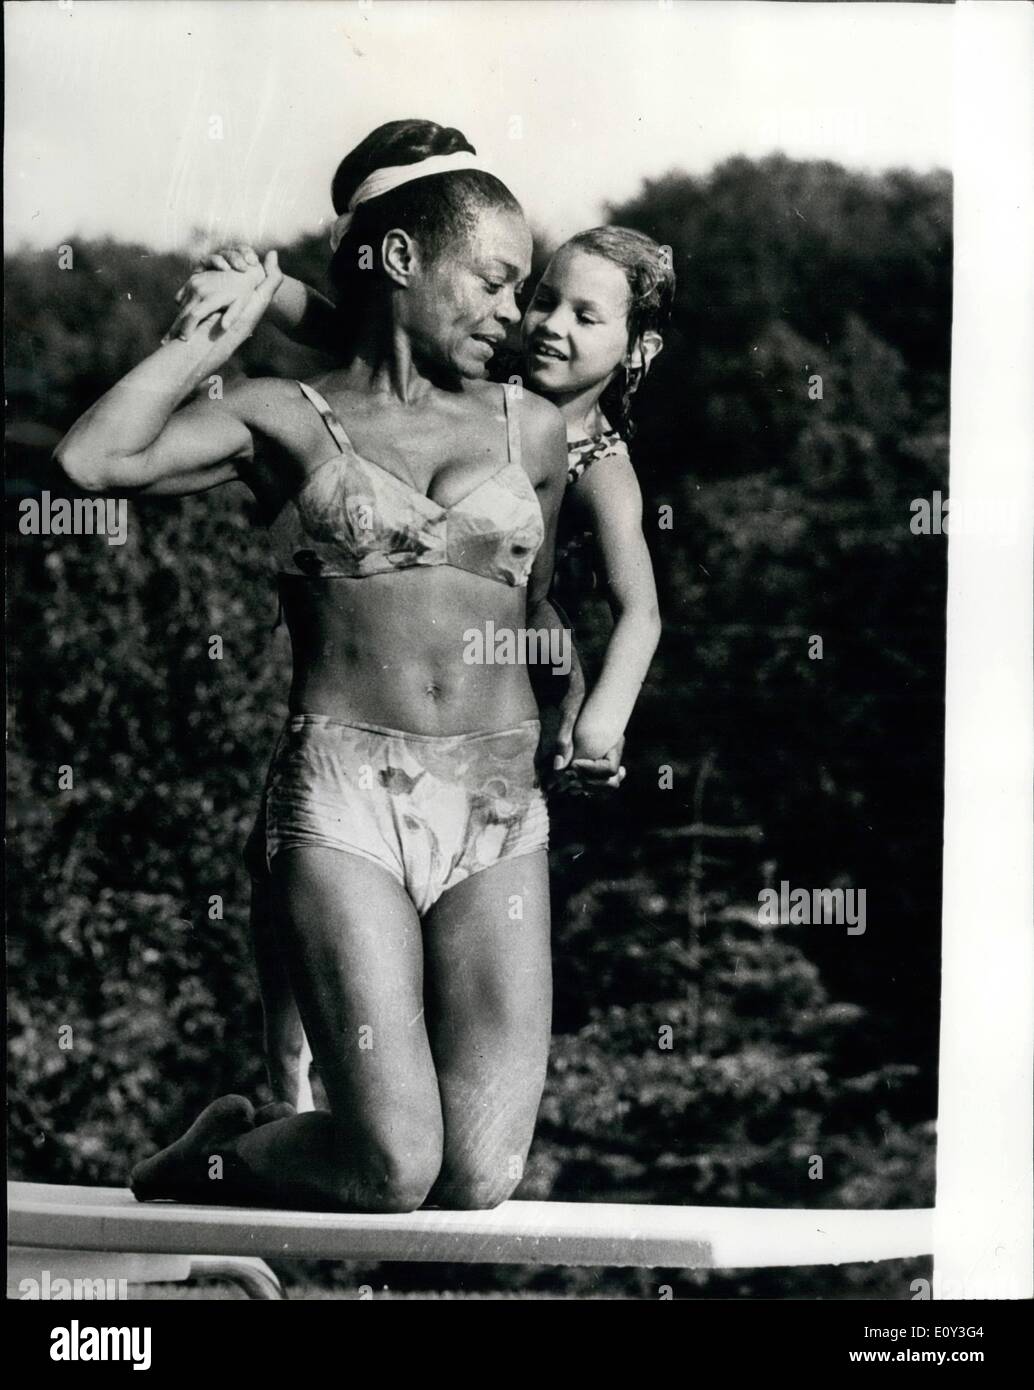 Jul. 07, 1968 - Eartha Kitt In Copenhagen: The famous singer Eartha Kitt, whose voice can be enjoyed in the next few weeks during her performance in Tivoli Varieteen in Copenhage, pictured here during a break in rehearsal and performance, with her seven year old daughter. Stock Photo